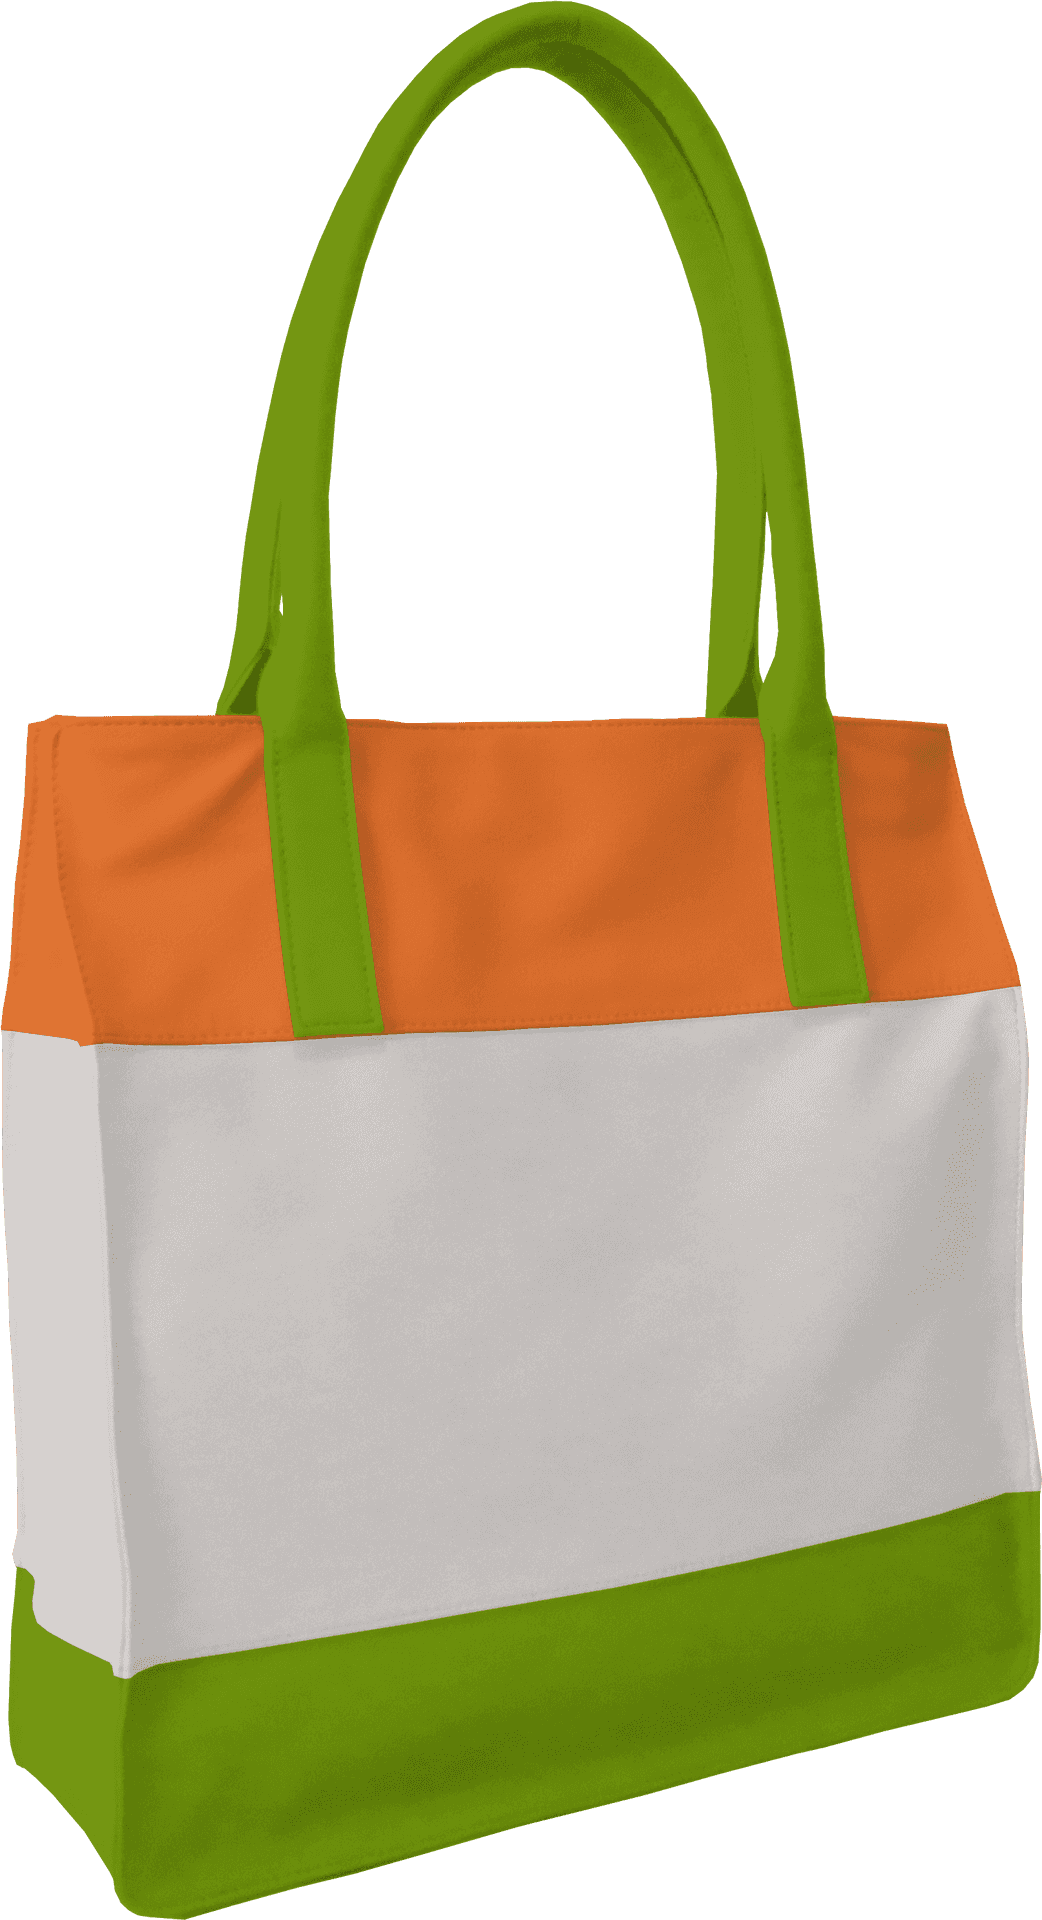 Tricolor Tote Bag Republic Day Inspiration PNG